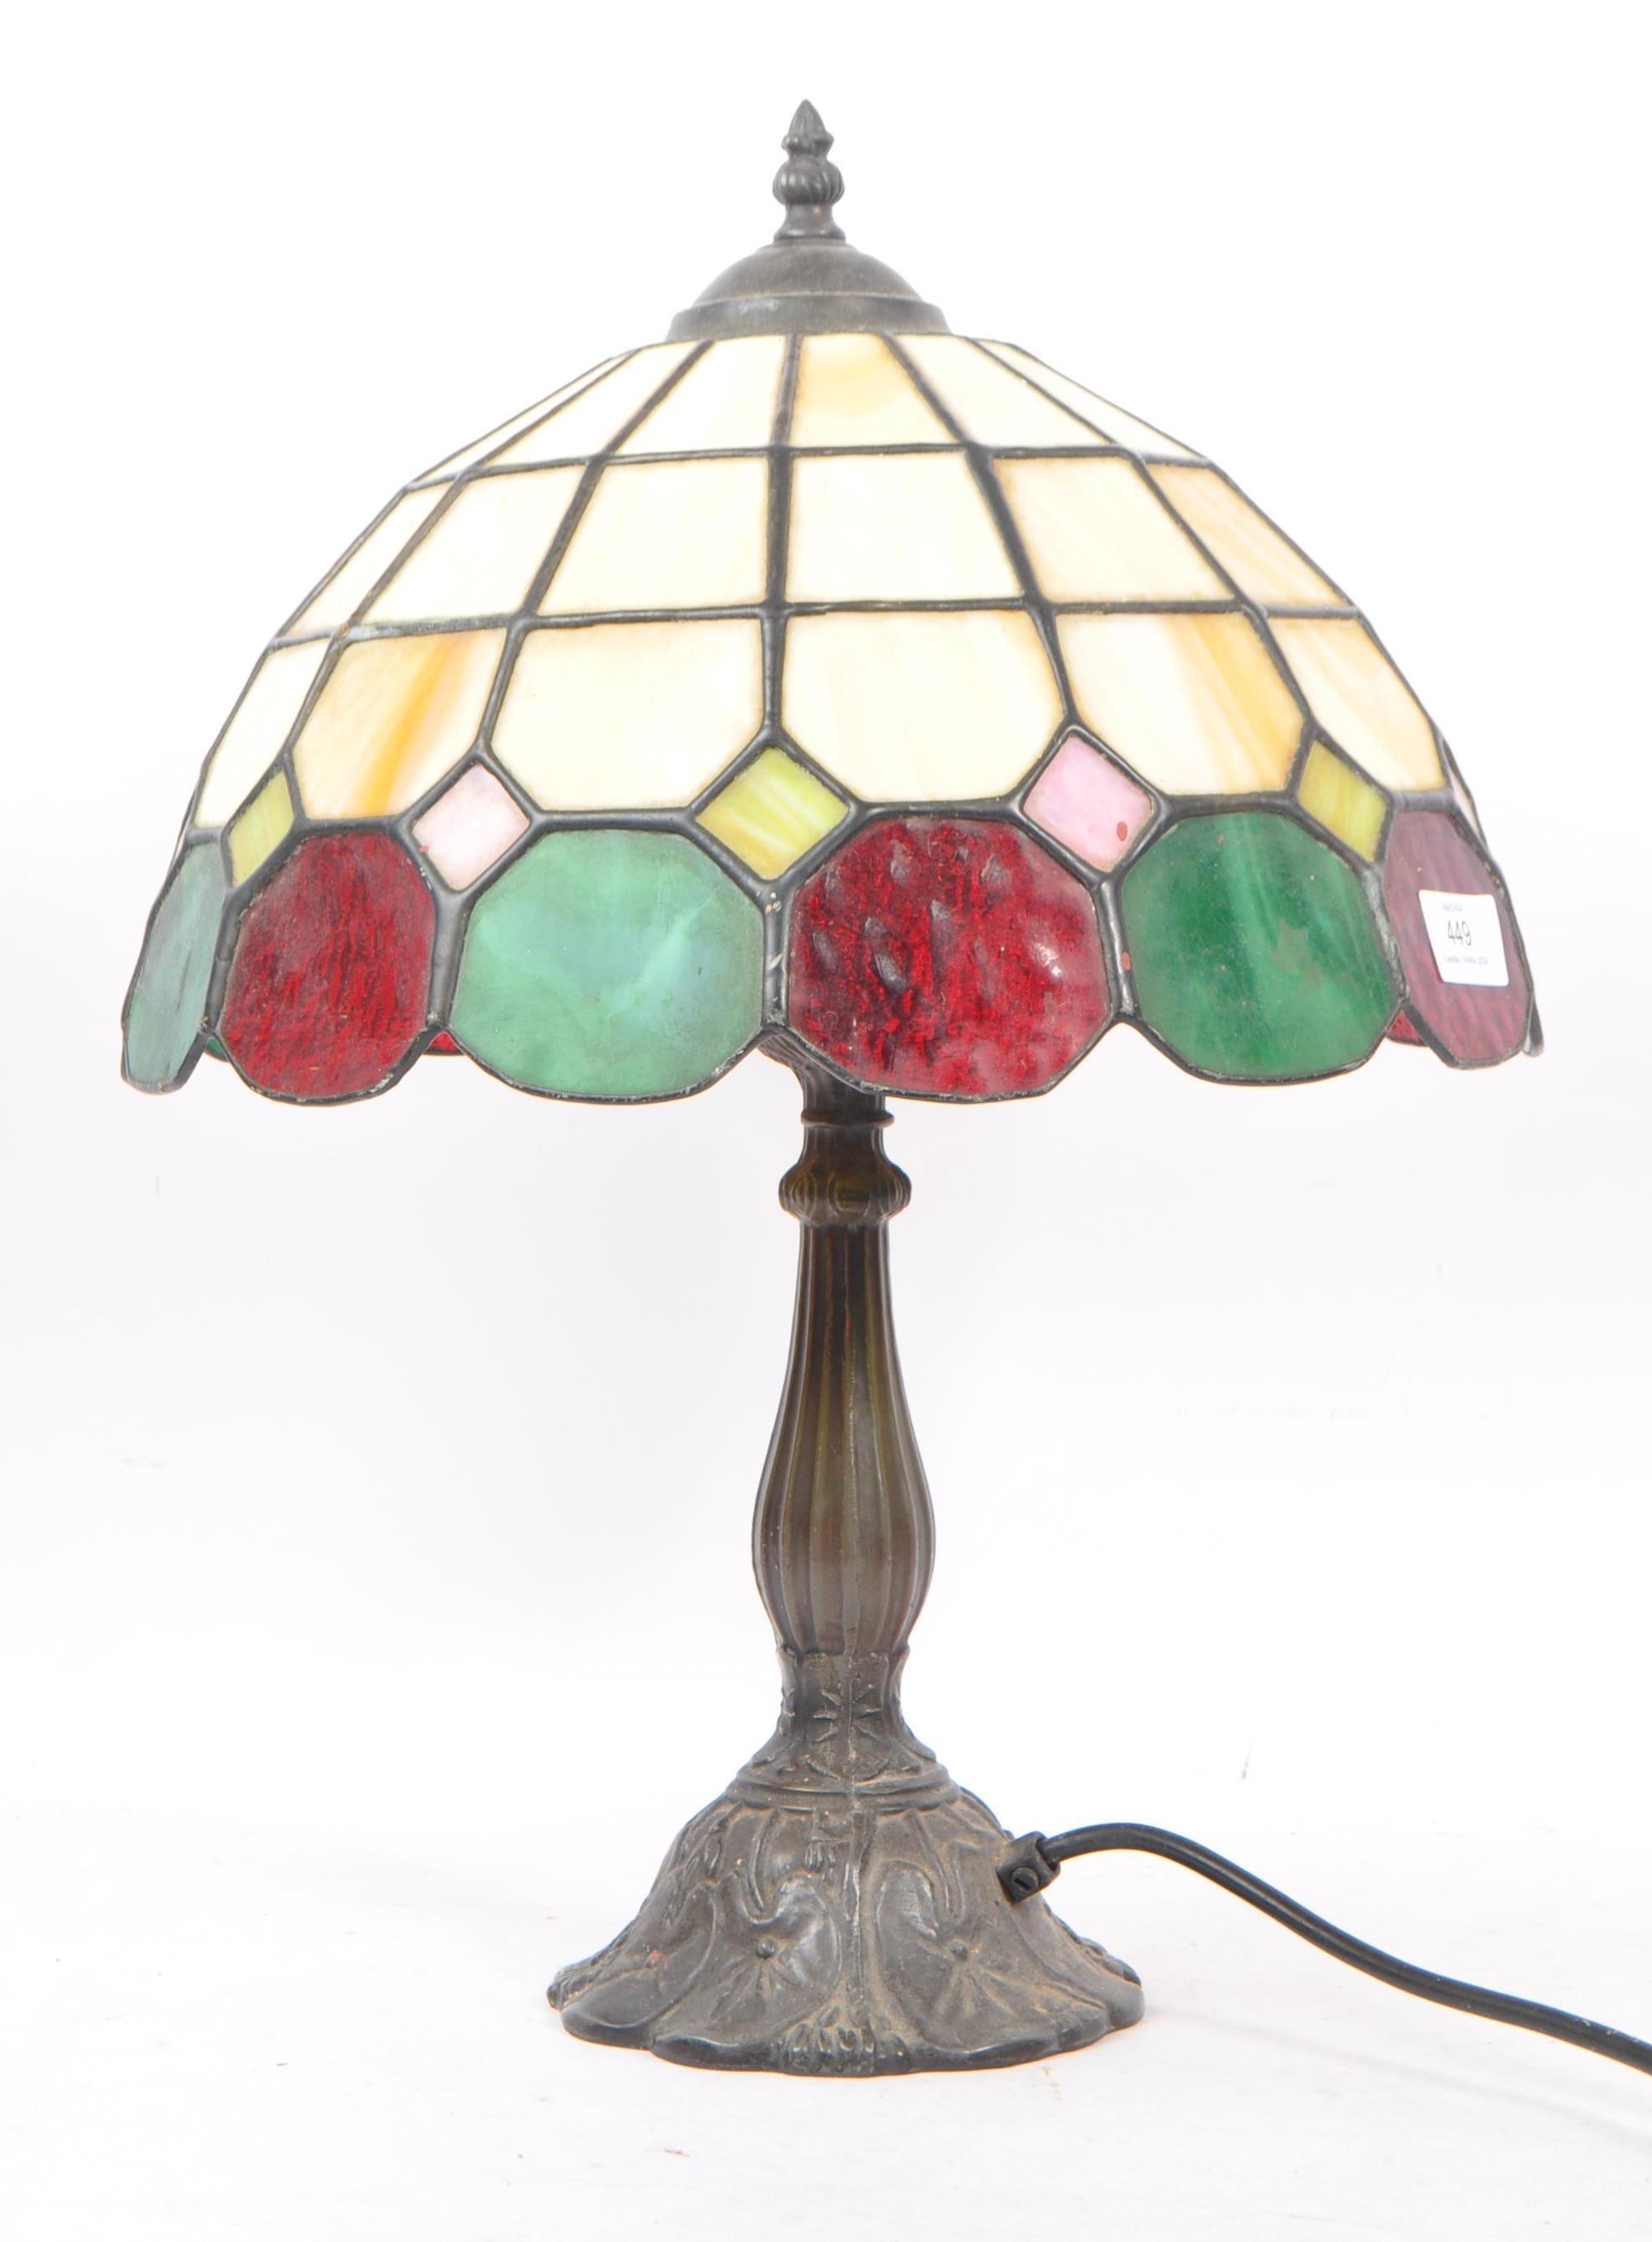 TIFFANY STYLE - 20TH CENTURY TIFFANY STYLE BISTRO TABLE LAMP - Image 2 of 5